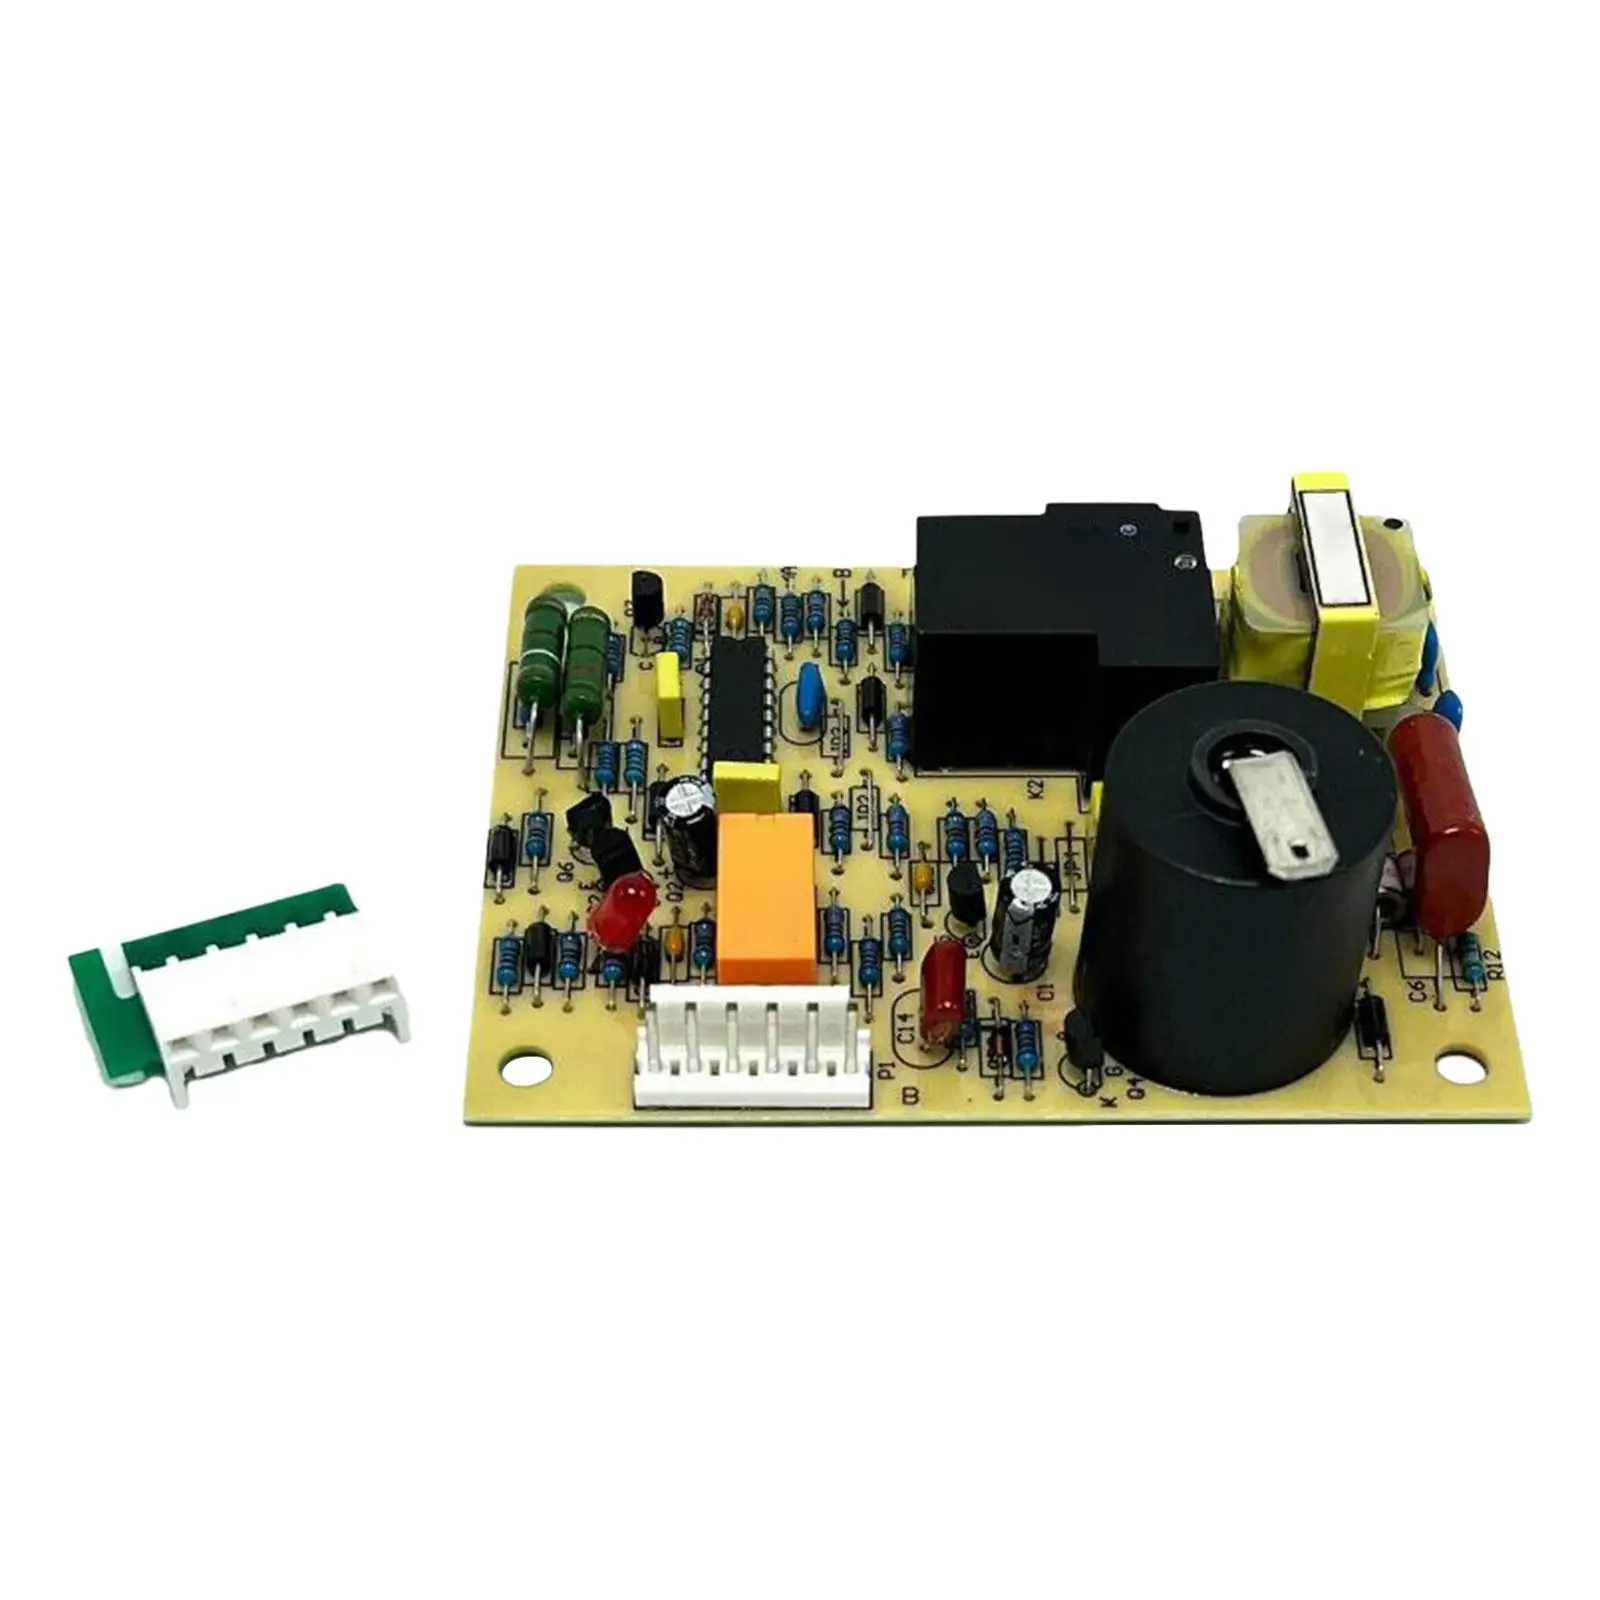 Ignition Control Circuit Board 31501 for 7912-ii Afmd25 DC82 25-32